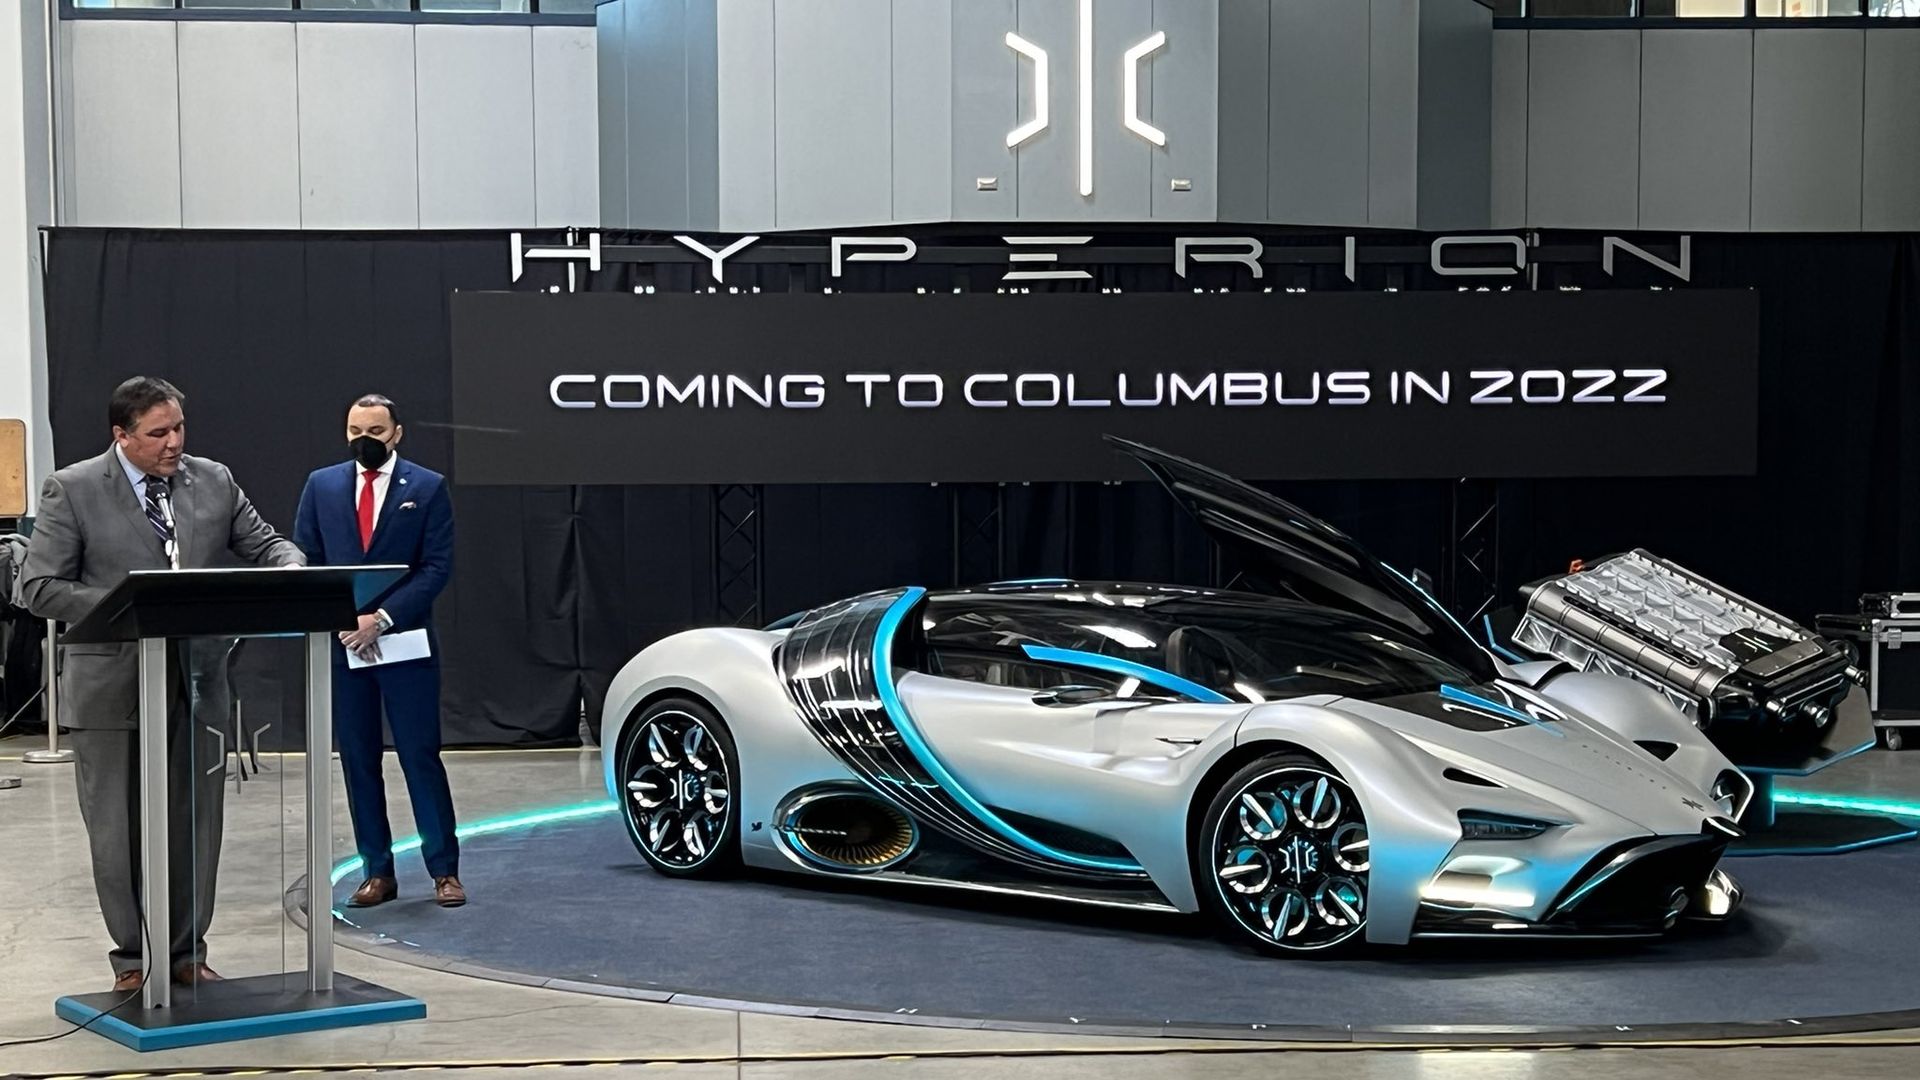 The Columbus mayor speaks at a podium next to a supercar with a banner reading "Coming to Columbus in 2022" in the background.